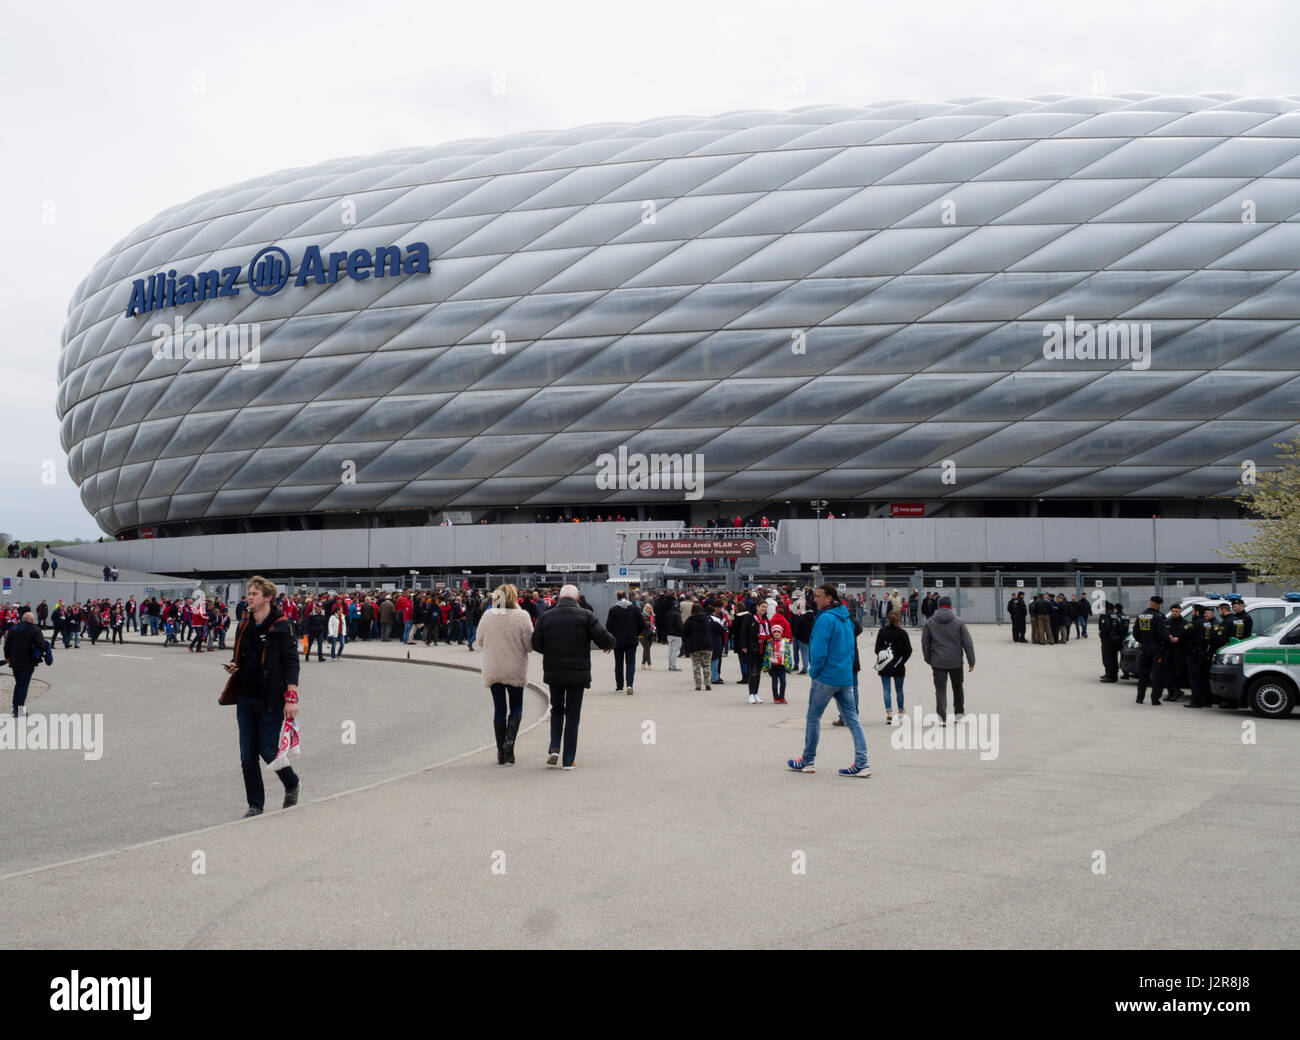 Munich, Germany - 22 April 2017: Football fans are entering the Allianz Arena football stadium in Munich, Germany. With 75'000 seats, Allianz Arena is Stock Photo